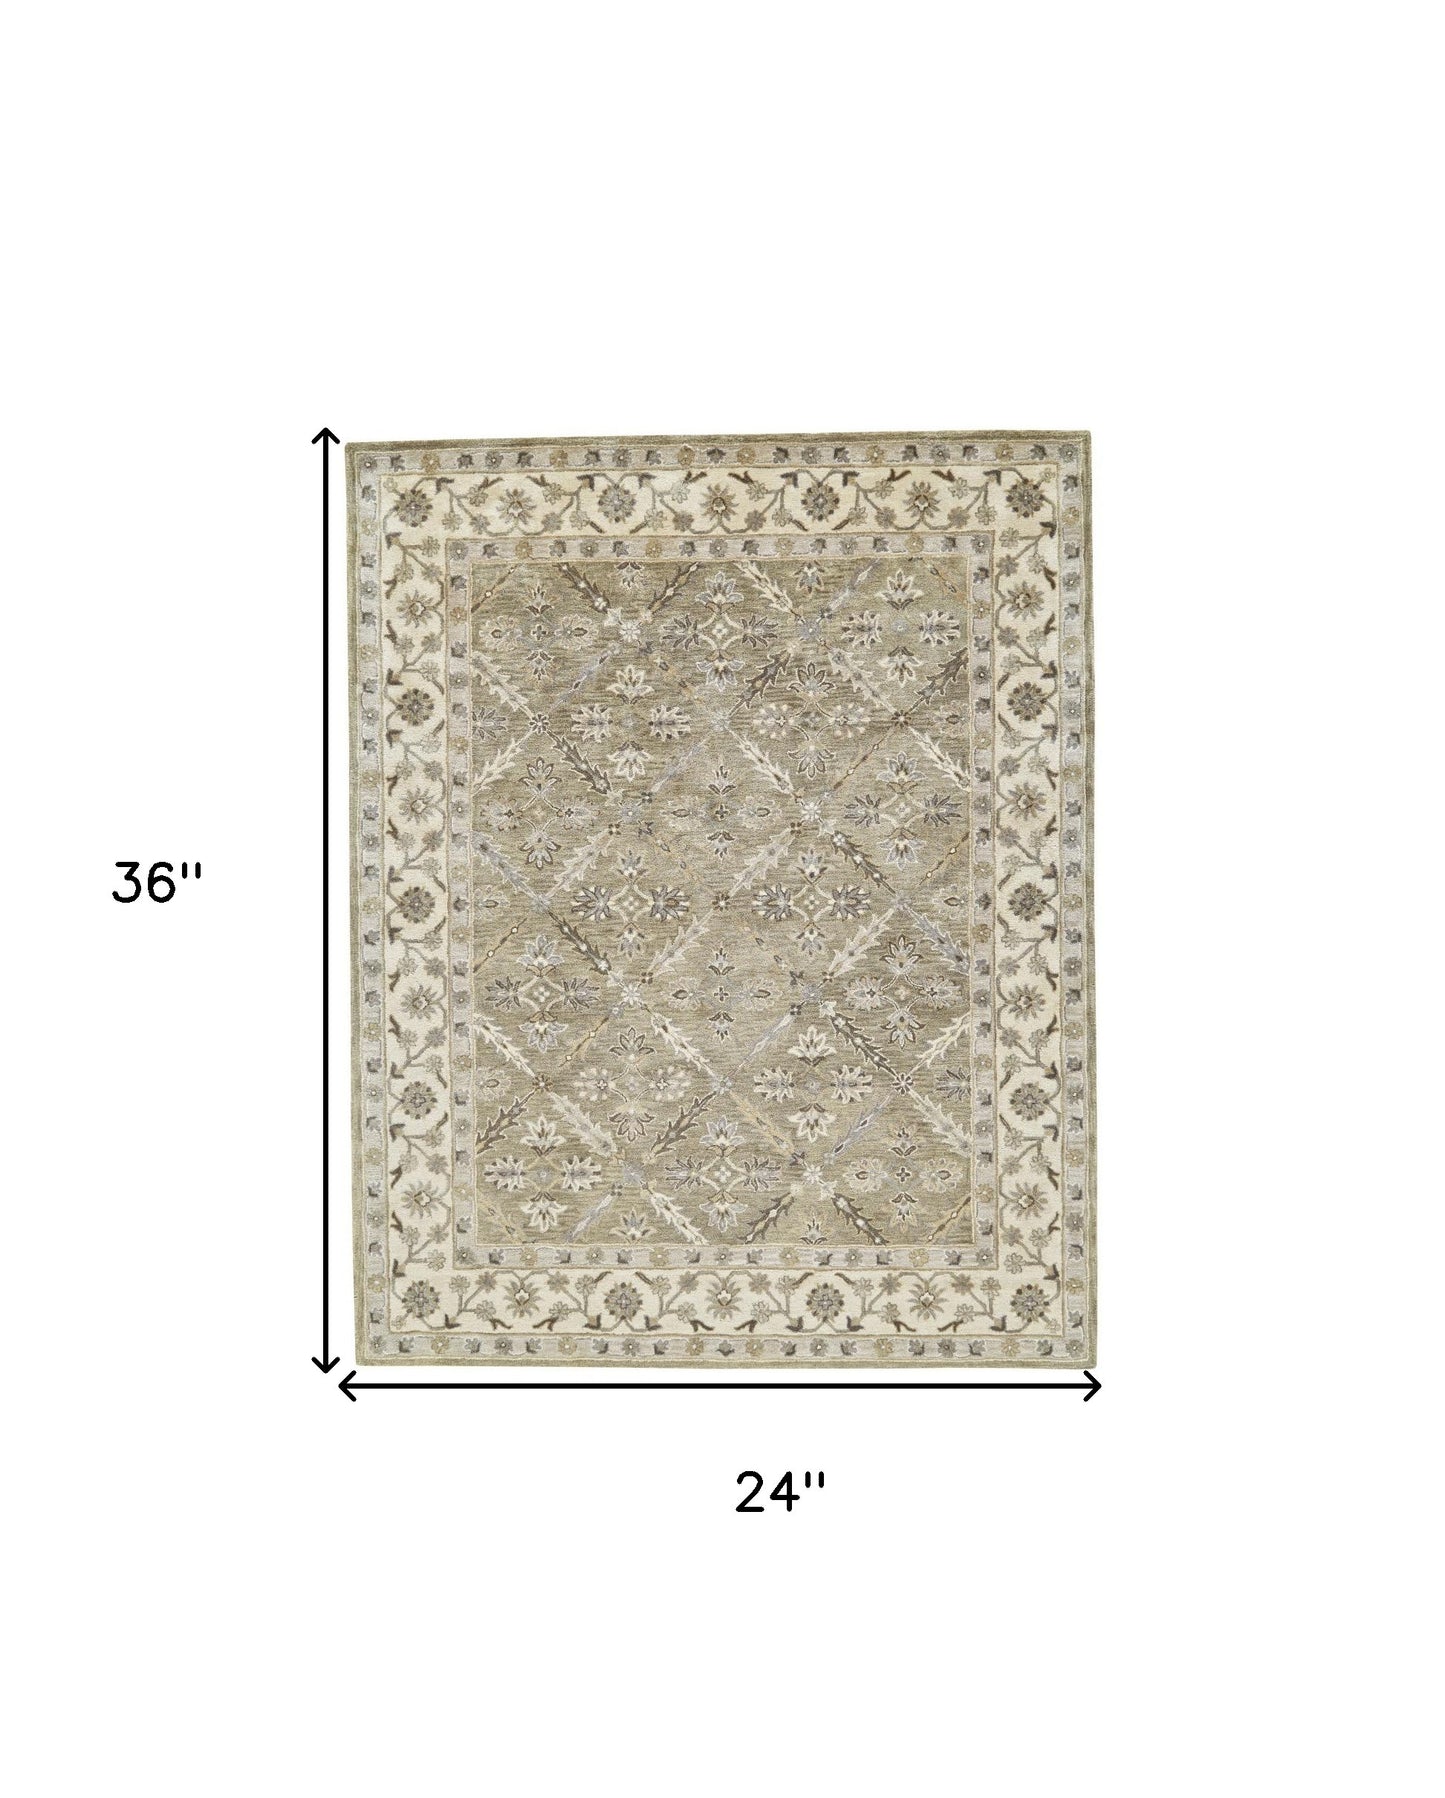 4' X 6' Green Brown And Taupe Wool Paisley Tufted Handmade Stain Resistant Area Rug